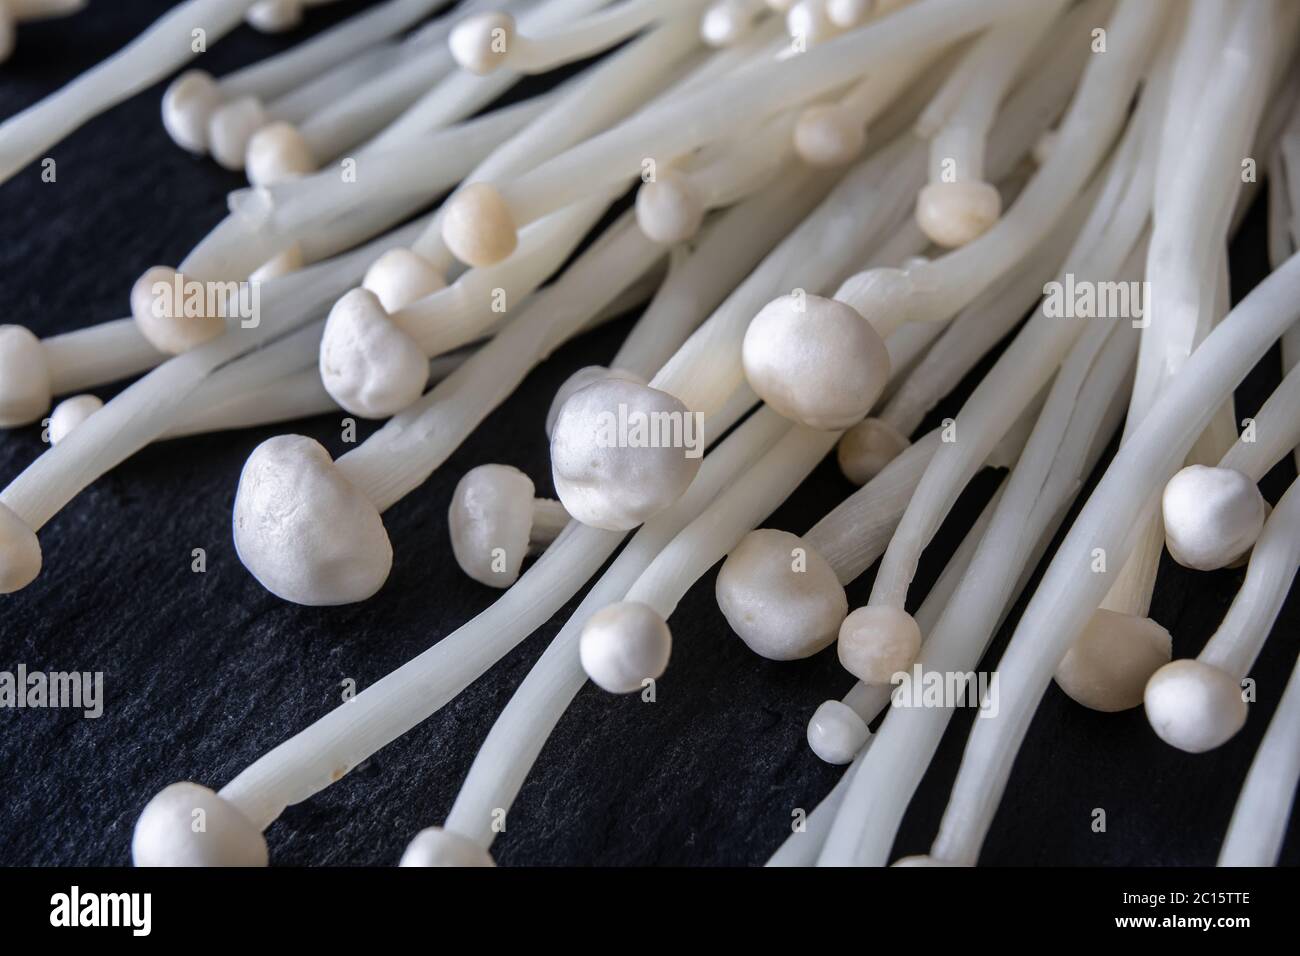 Enoki mushrooms, an ingredient often used in Japanese cooking and other asian cuisine. Stock Photo